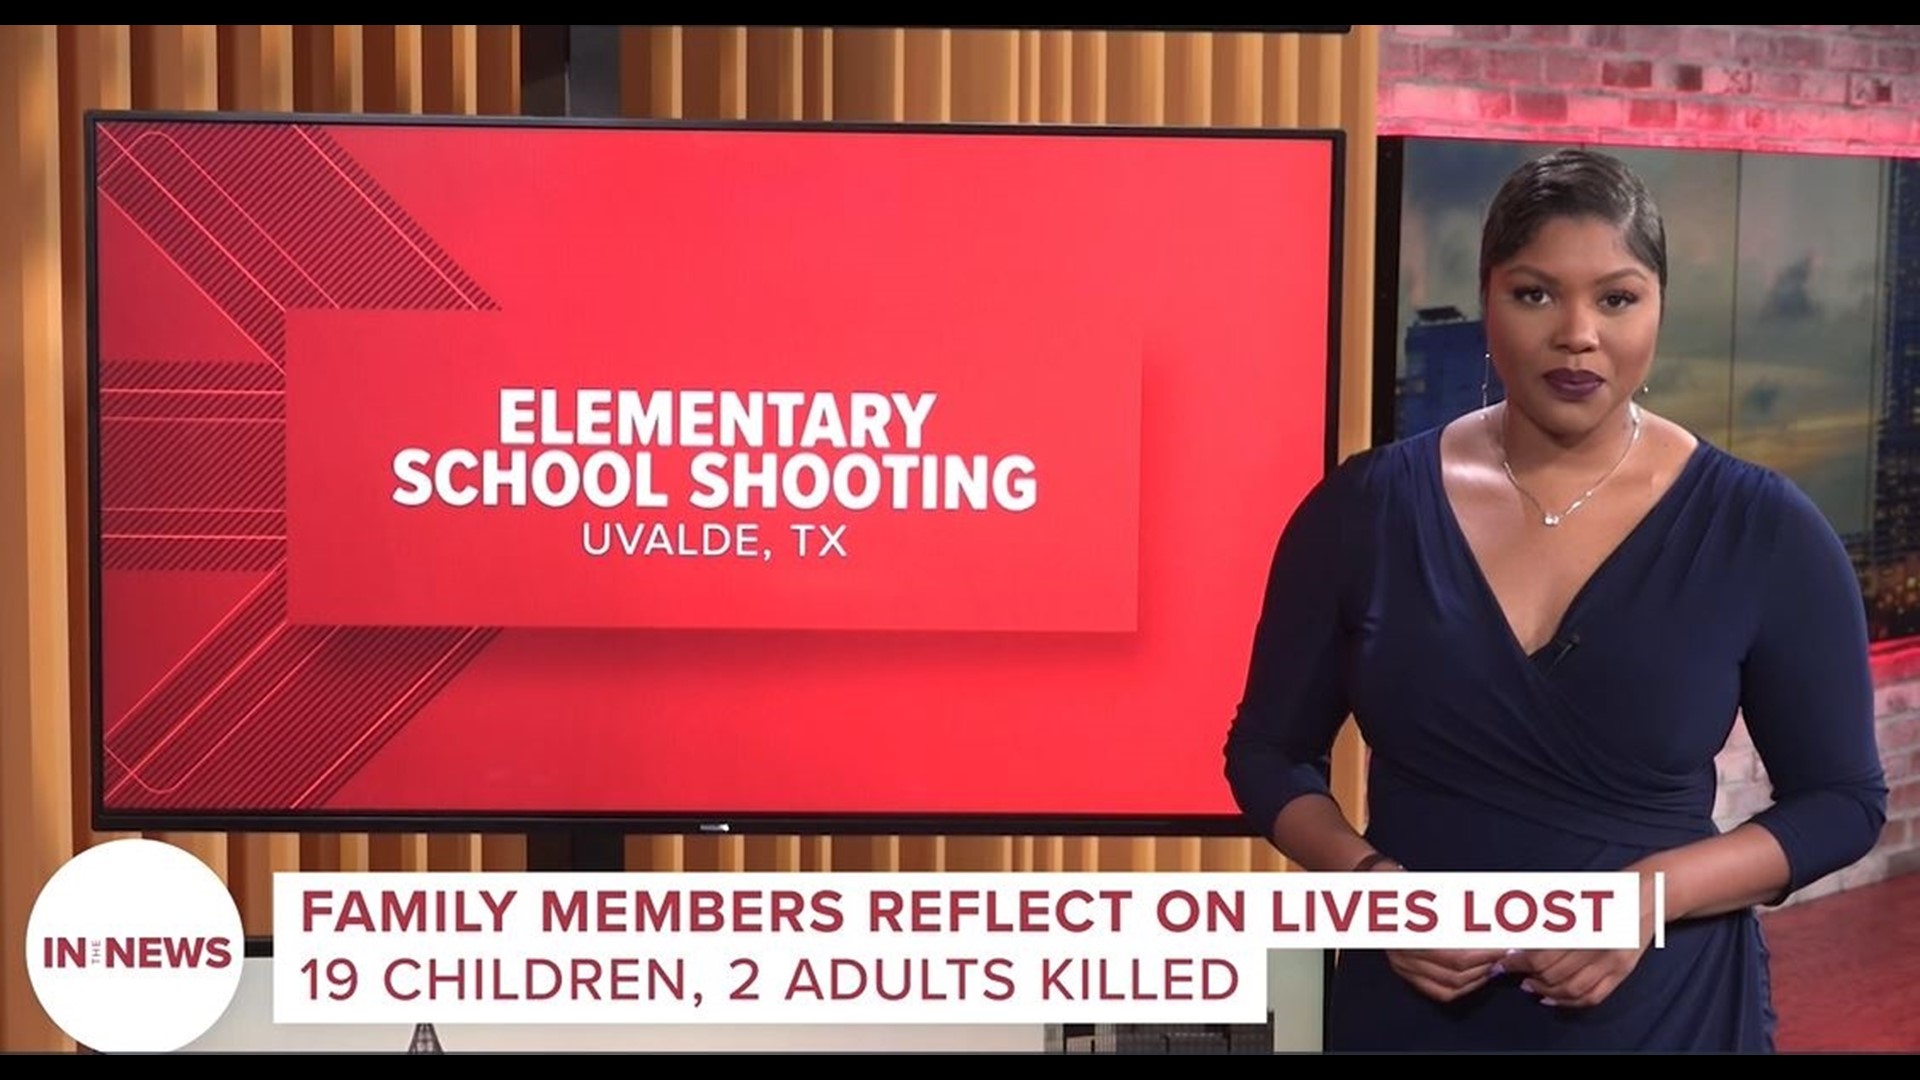 A mass shooting at an elementary school in Uvalde, TX leaves a community grieving 21 lives, mostly children. Families and experts react, as we verify viral claims.